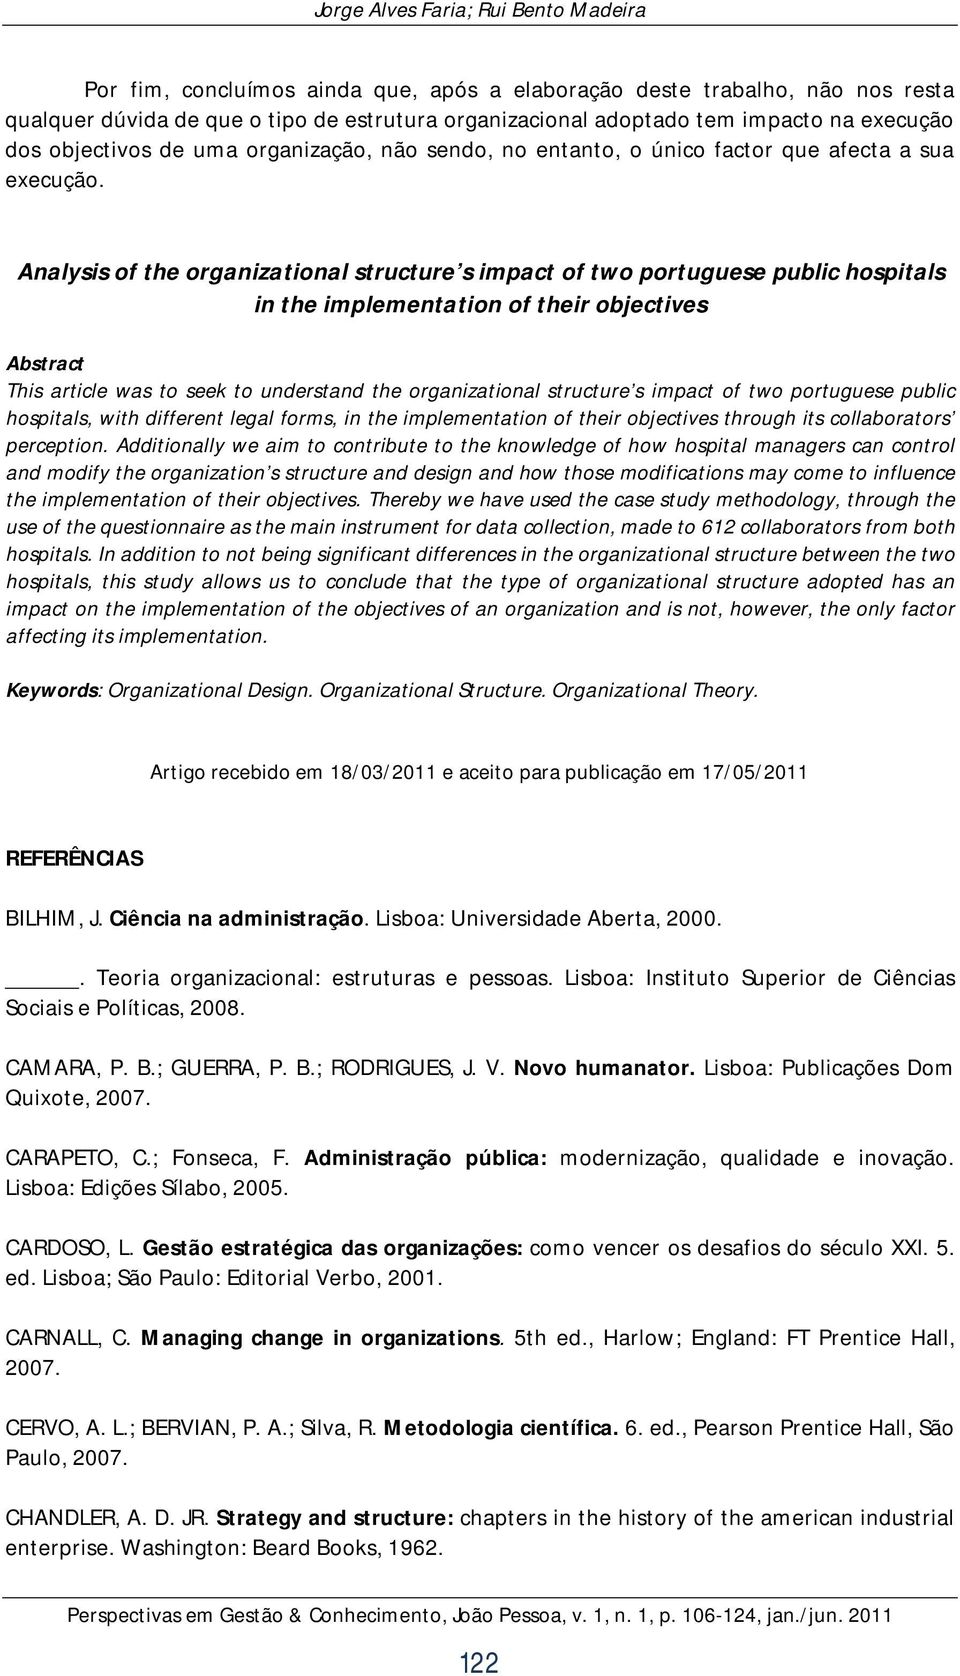 Analysis of the organizational structure s impact of two portuguese public hospitals in the implementation of their objectives Abstract This article was to seek to understand the organizational